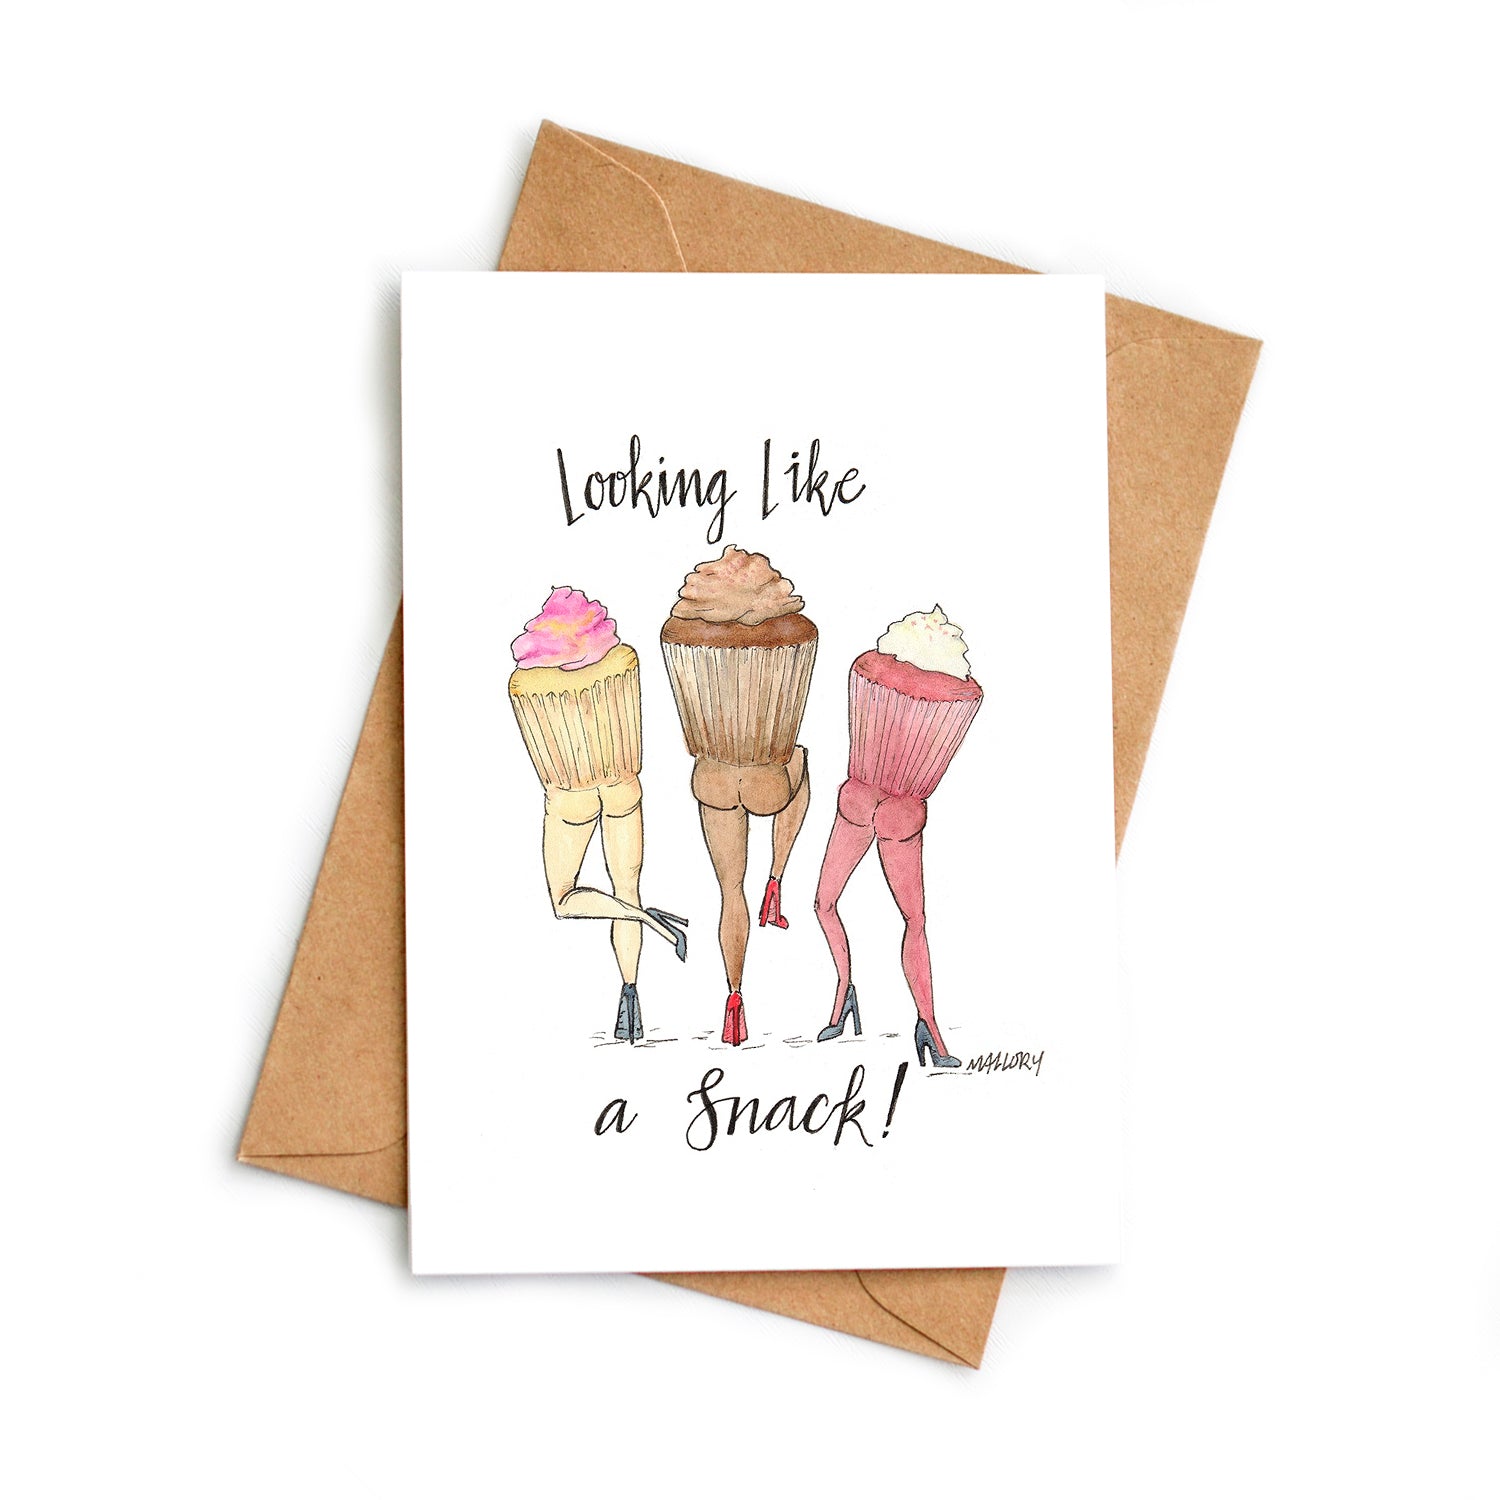 Image of greeting card on kraft recycled envelope. Card is illustrated with a vanilla cupcake, a chocolate cupcake and a red velvet cupcake with butts. The card reads, "Looking like a snack!".